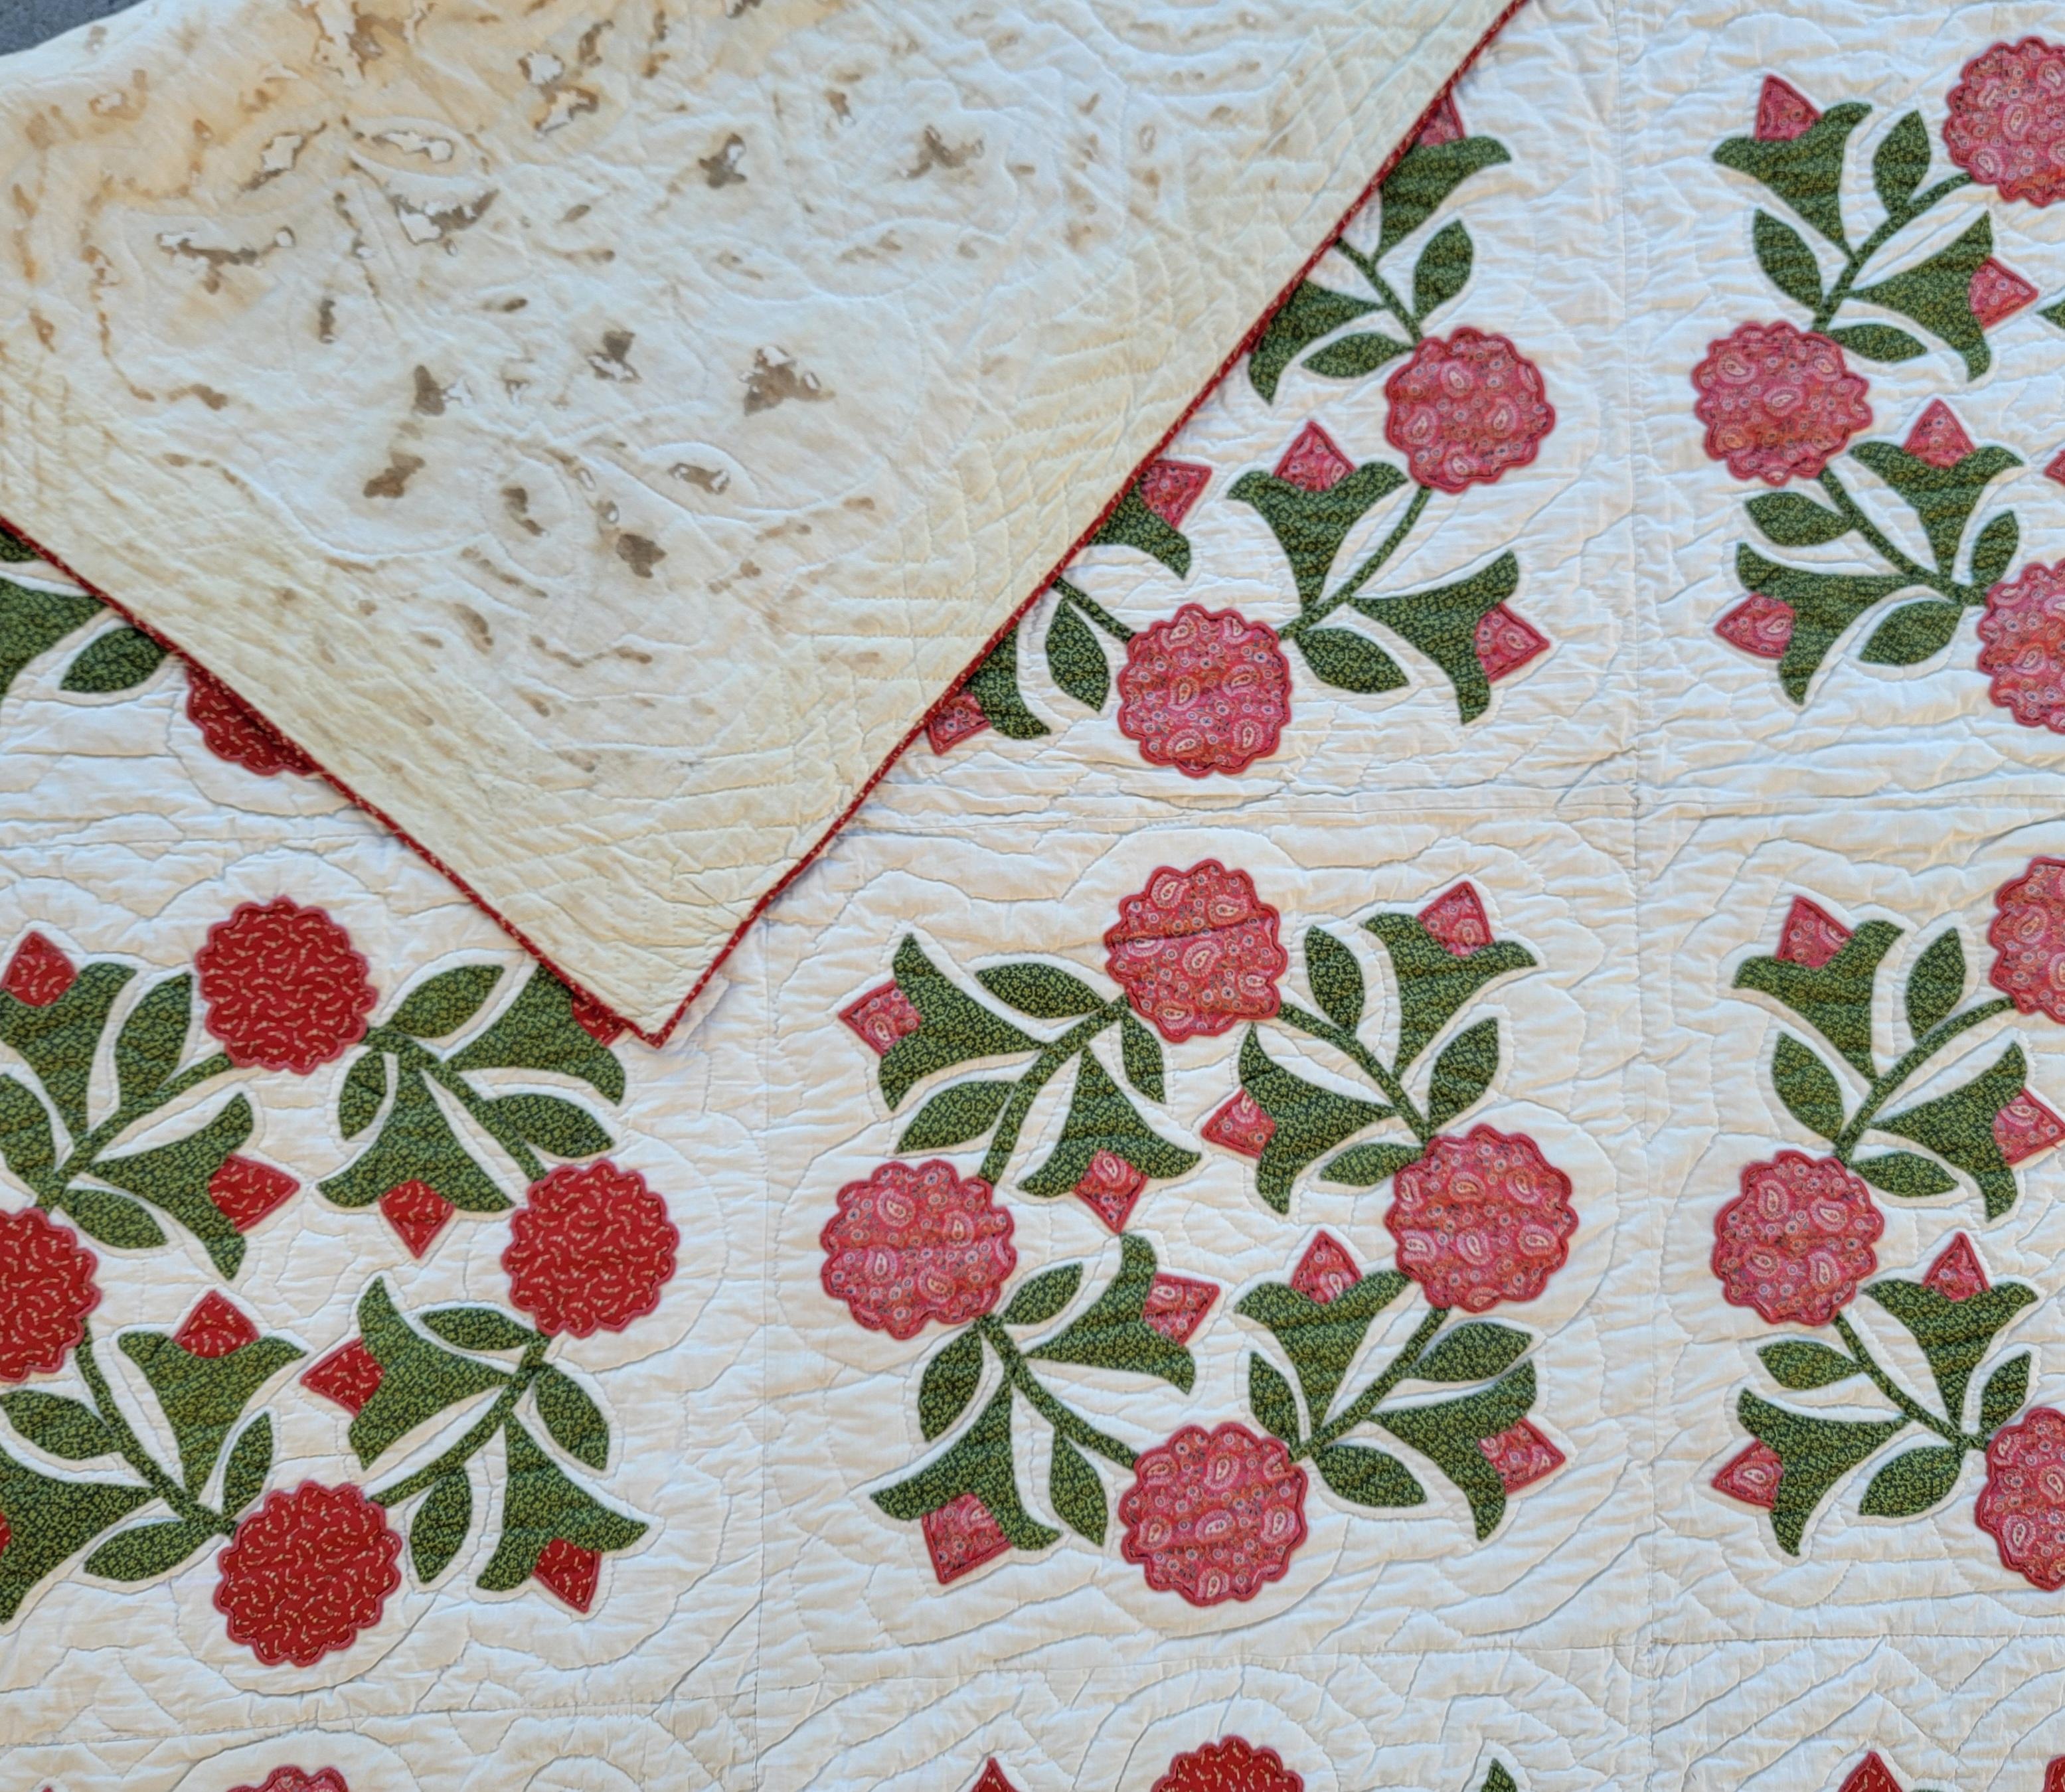 19th Century 19thC Red & Green Wreath Applique Quilt For Sale